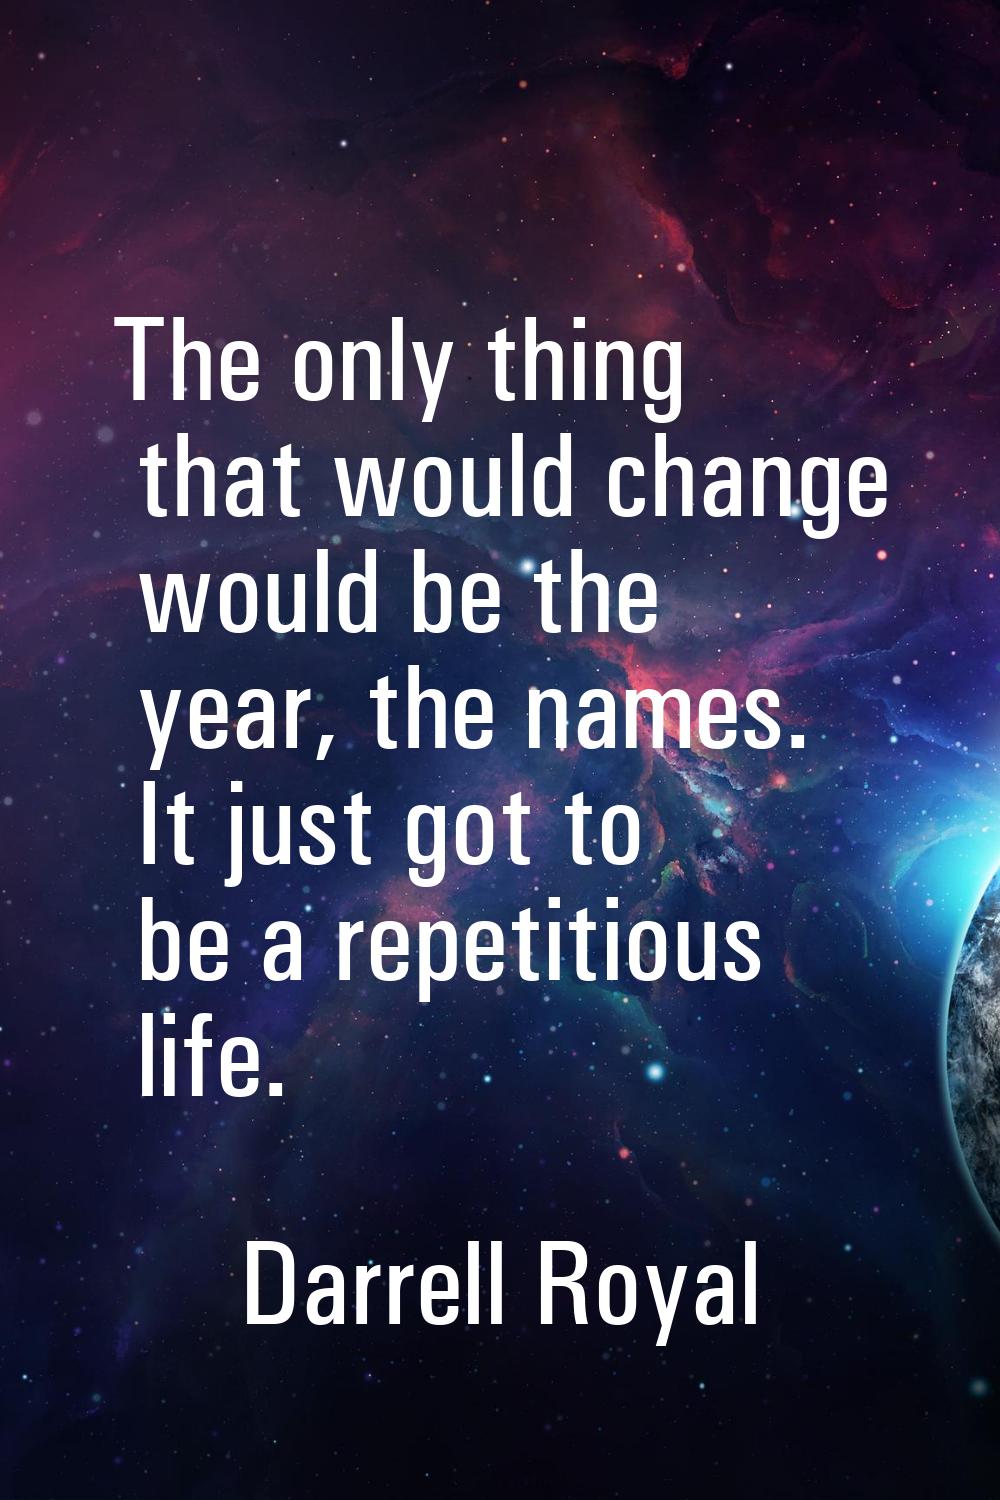 The only thing that would change would be the year, the names. It just got to be a repetitious life